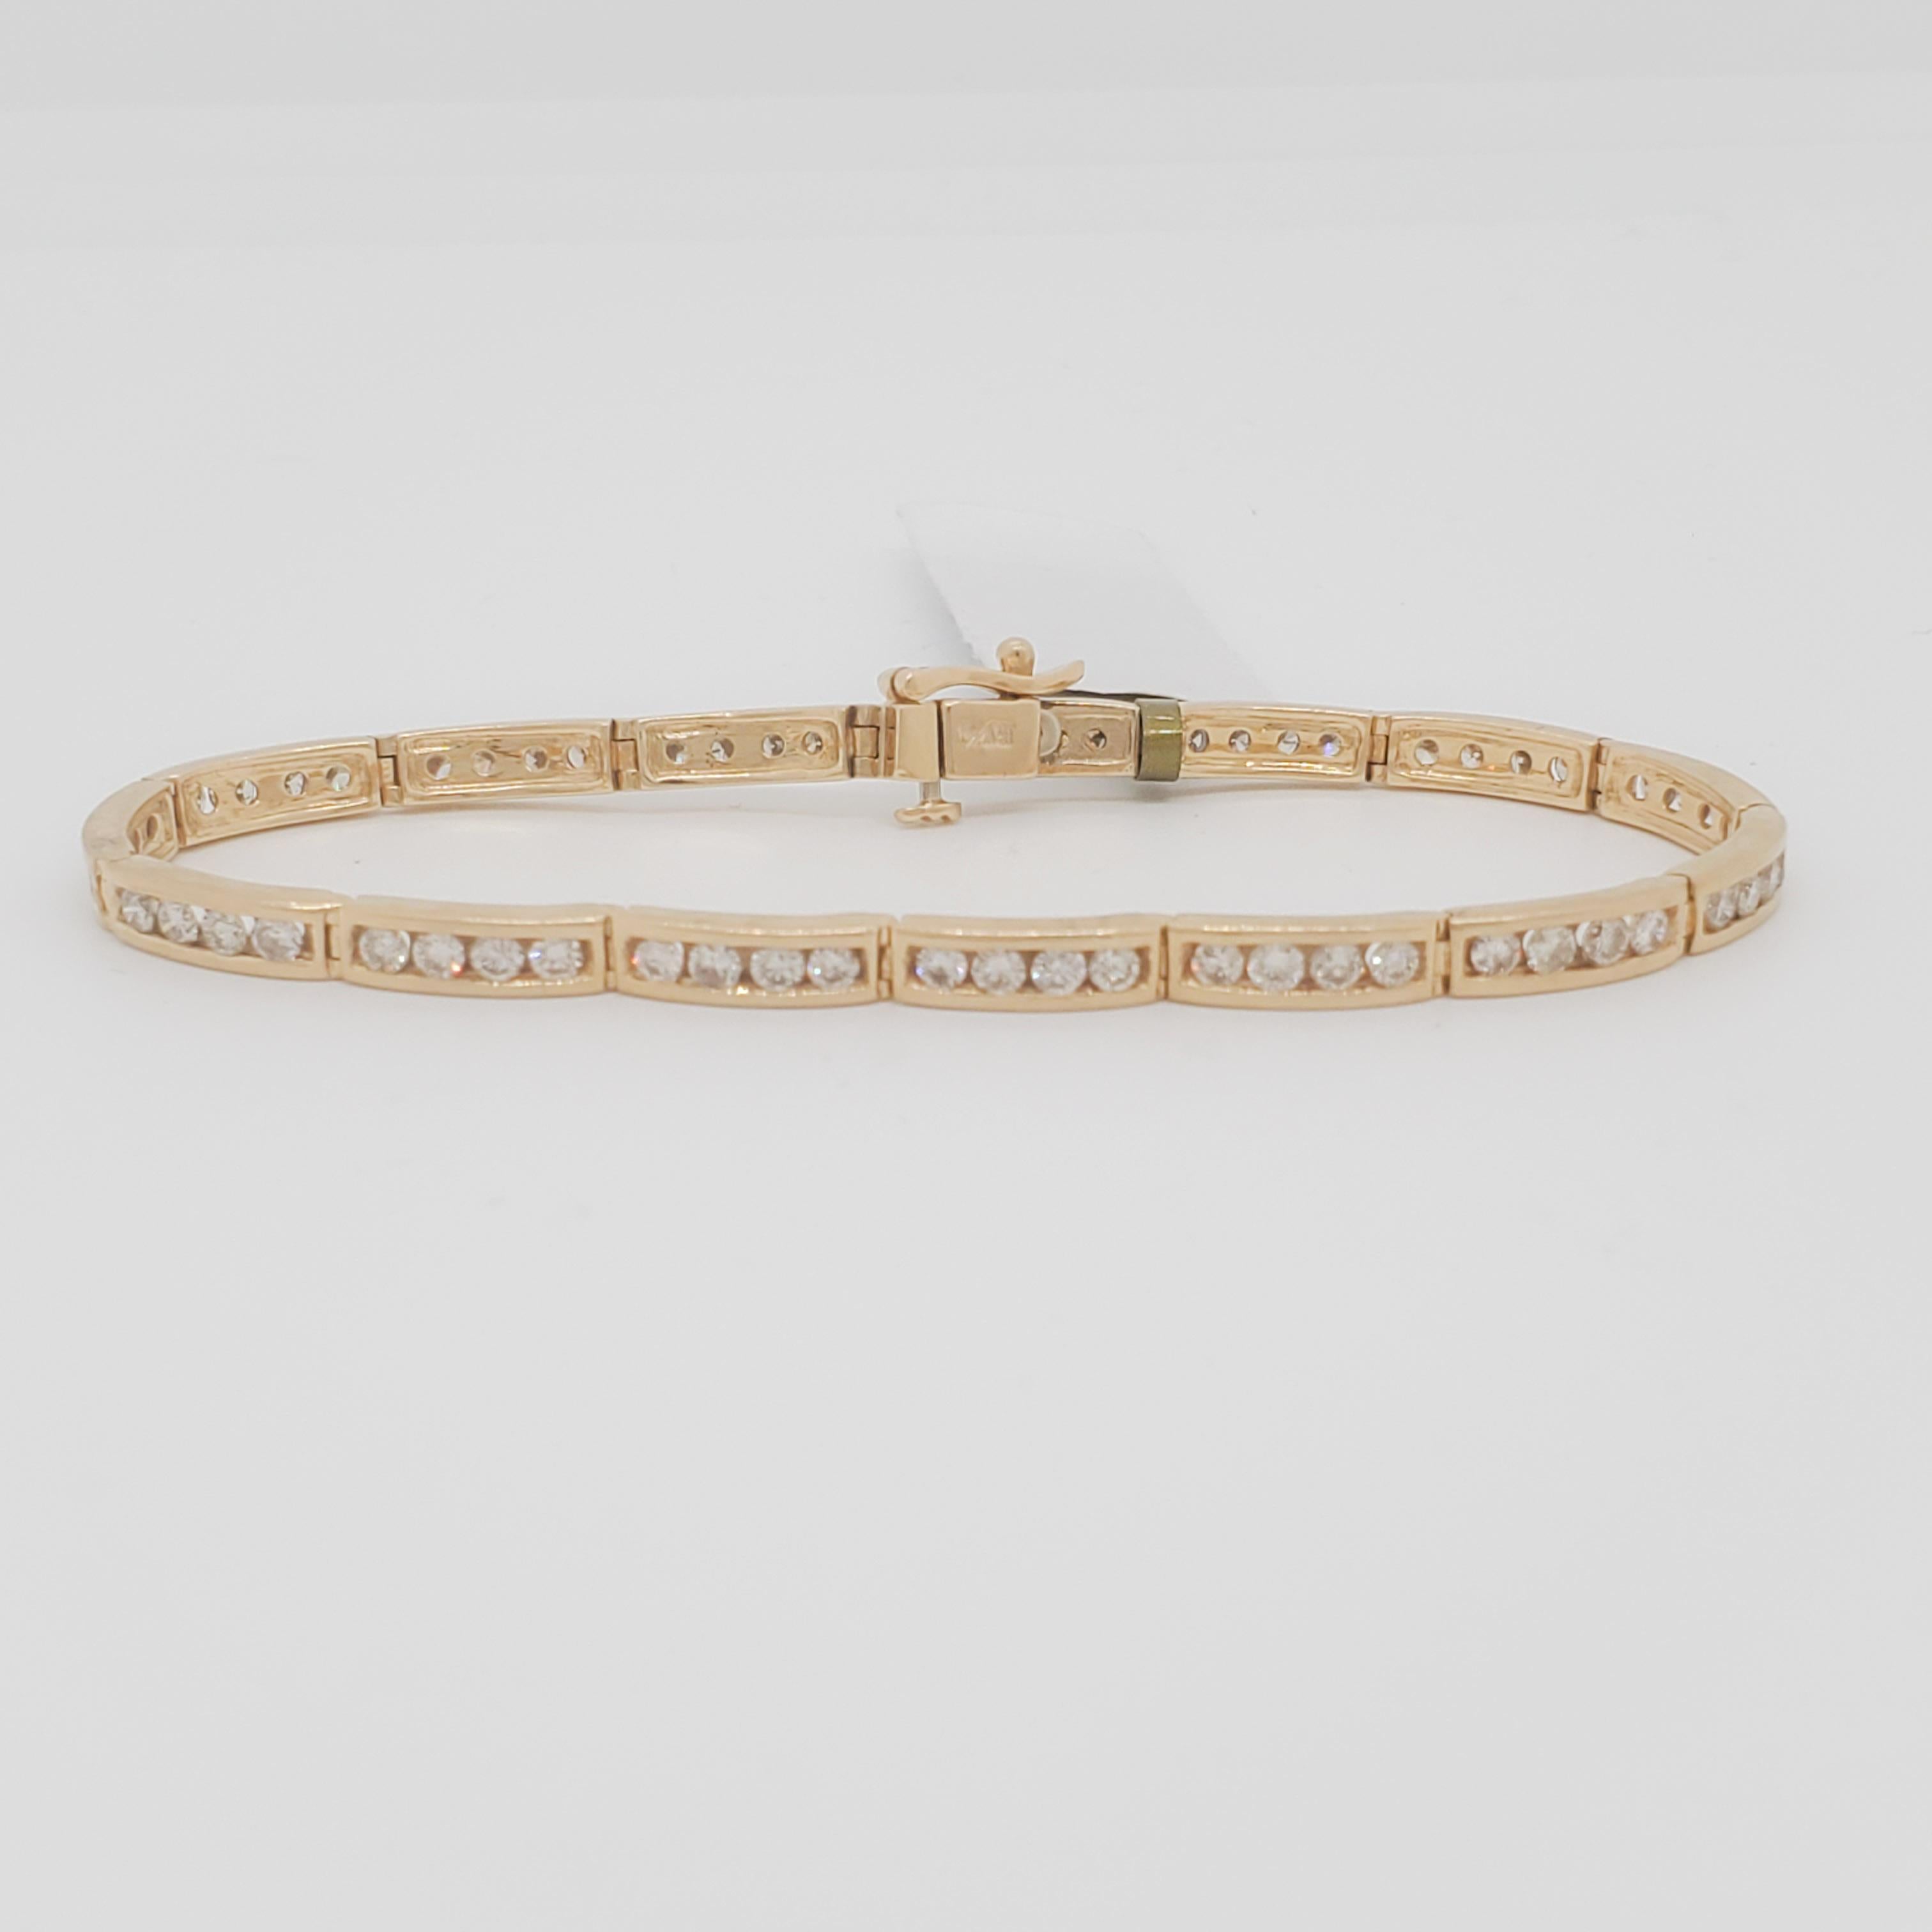 Beautiful straight bracelet with 4.00 ct. of good quality white diamond rounds.  Handmade in 14k yellow gold.  Length is 7.25